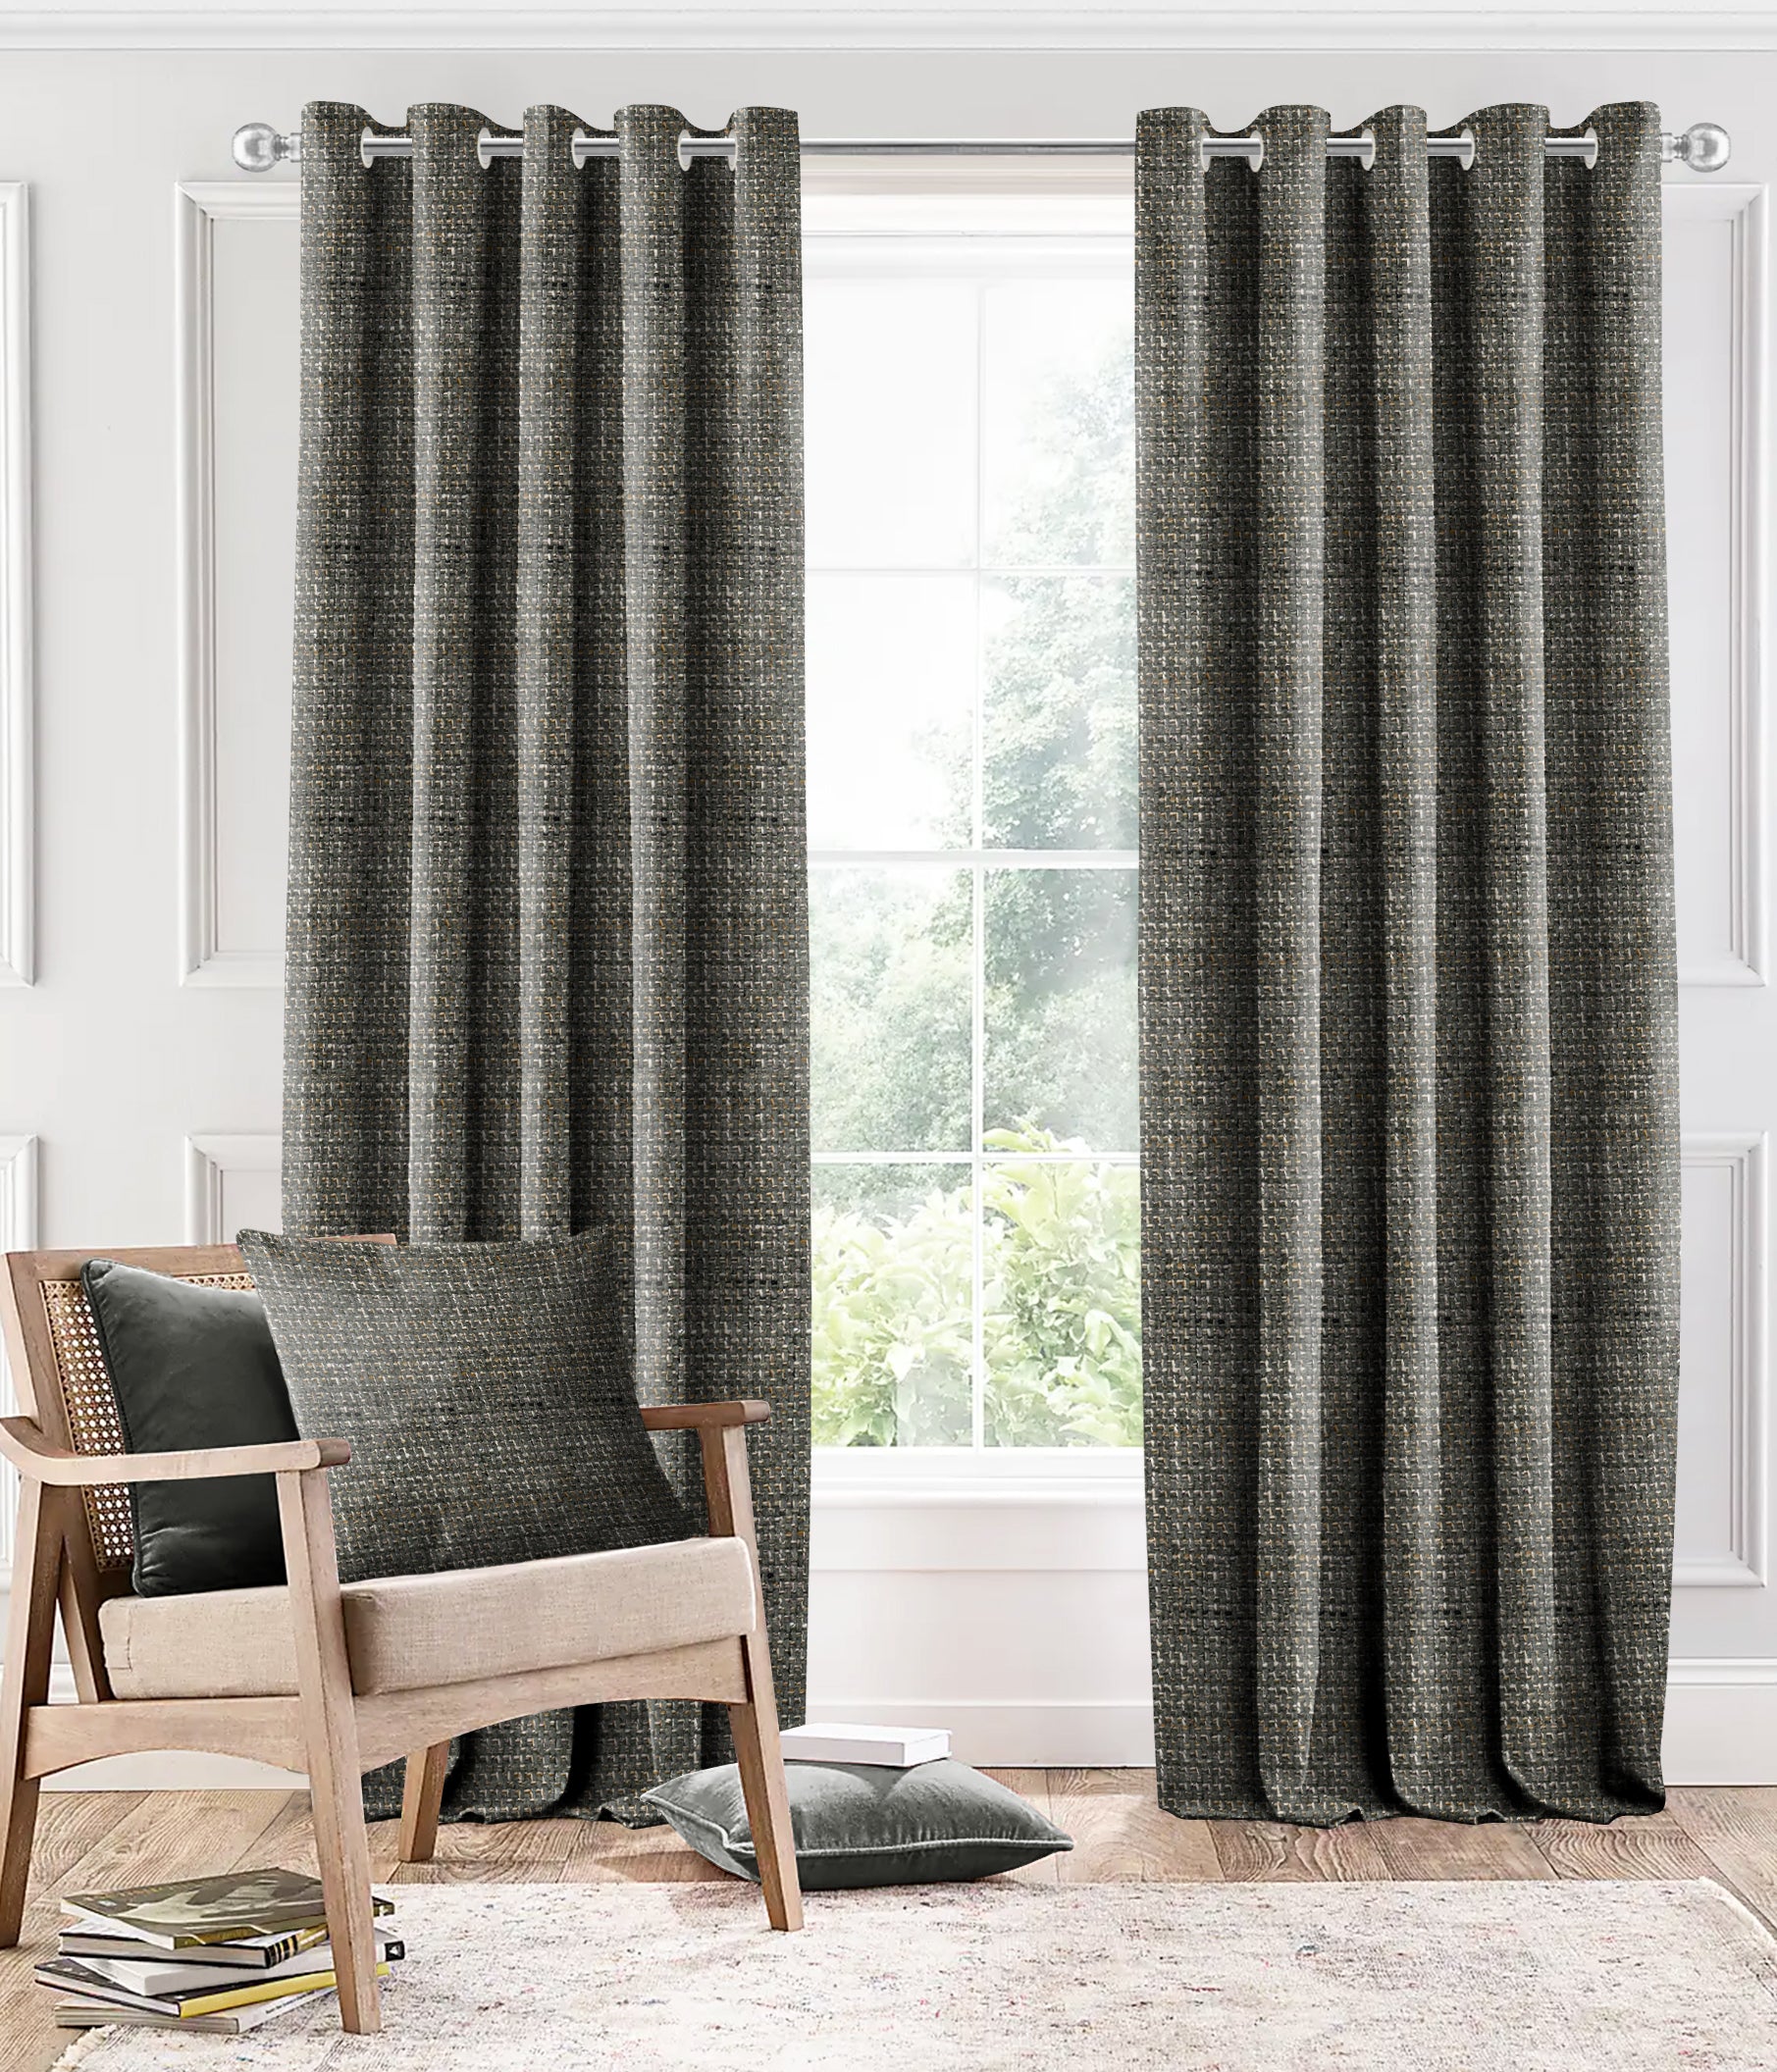 DELUXE TEX GREY BLACKOUT CURTAIN